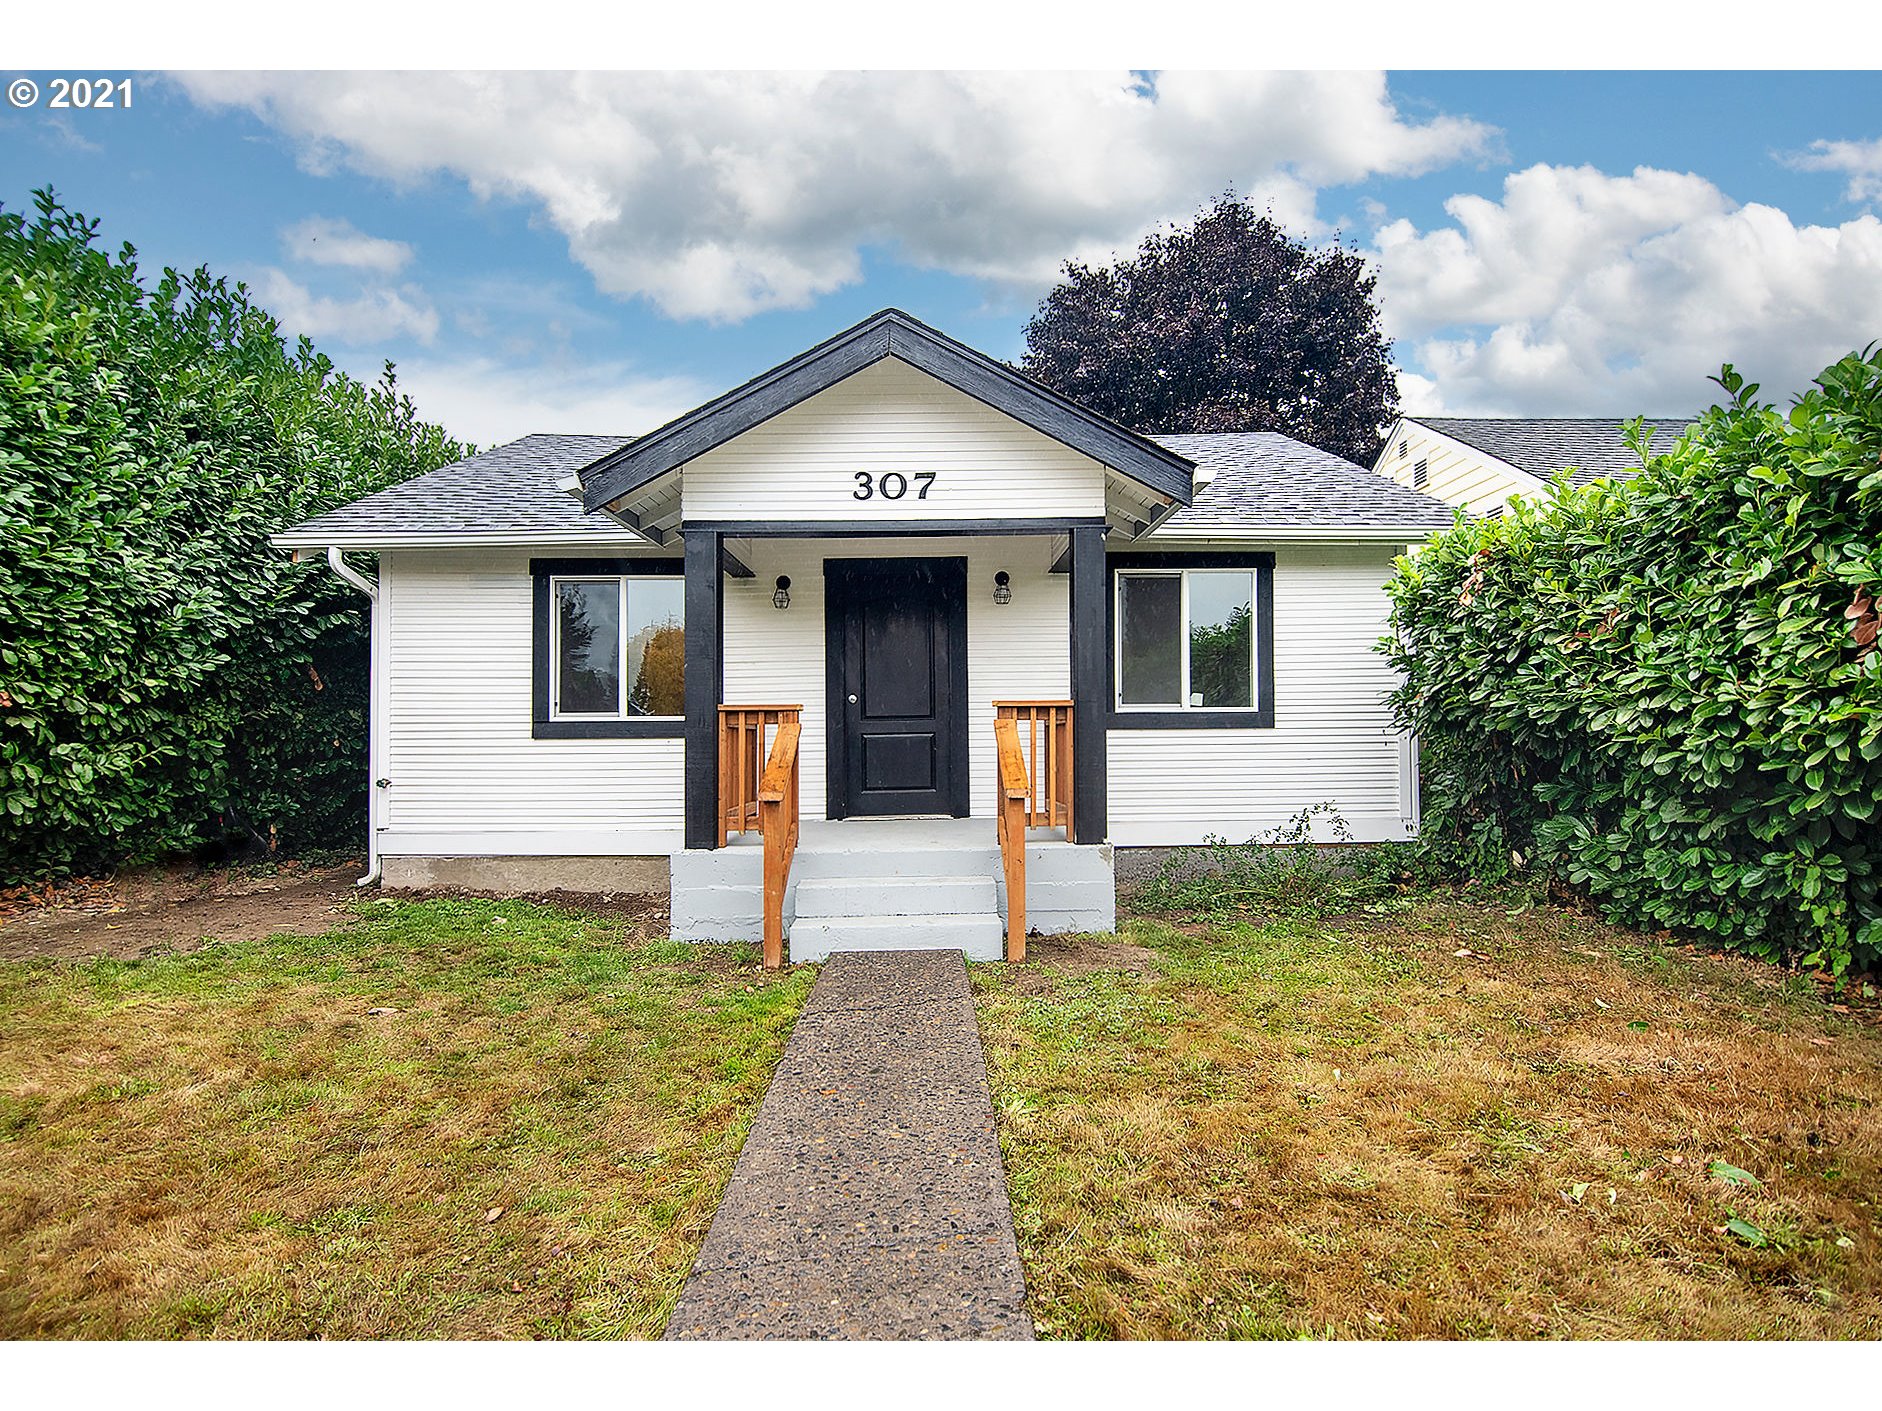 307 26TH AVE (1 of 18)